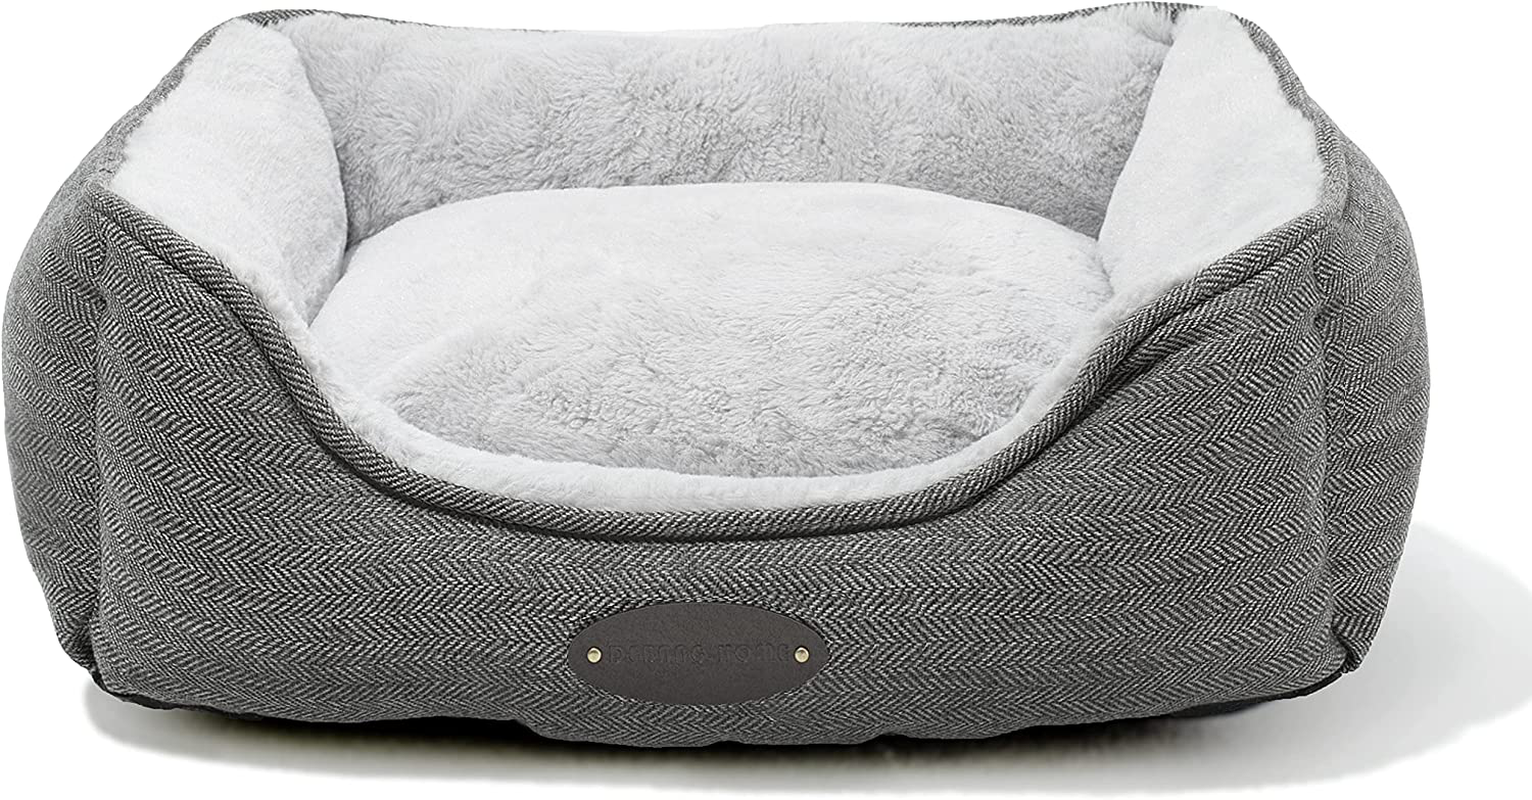 Dog Bed,Dog Beds for Medium Dogs,Cat Bed,Calming Dog Bed,Anxiety Comfy Durable Pet Beds with Reversible&Washable Cushion,Rectangle Dog Bed in Grey Color. DEBANG HOME